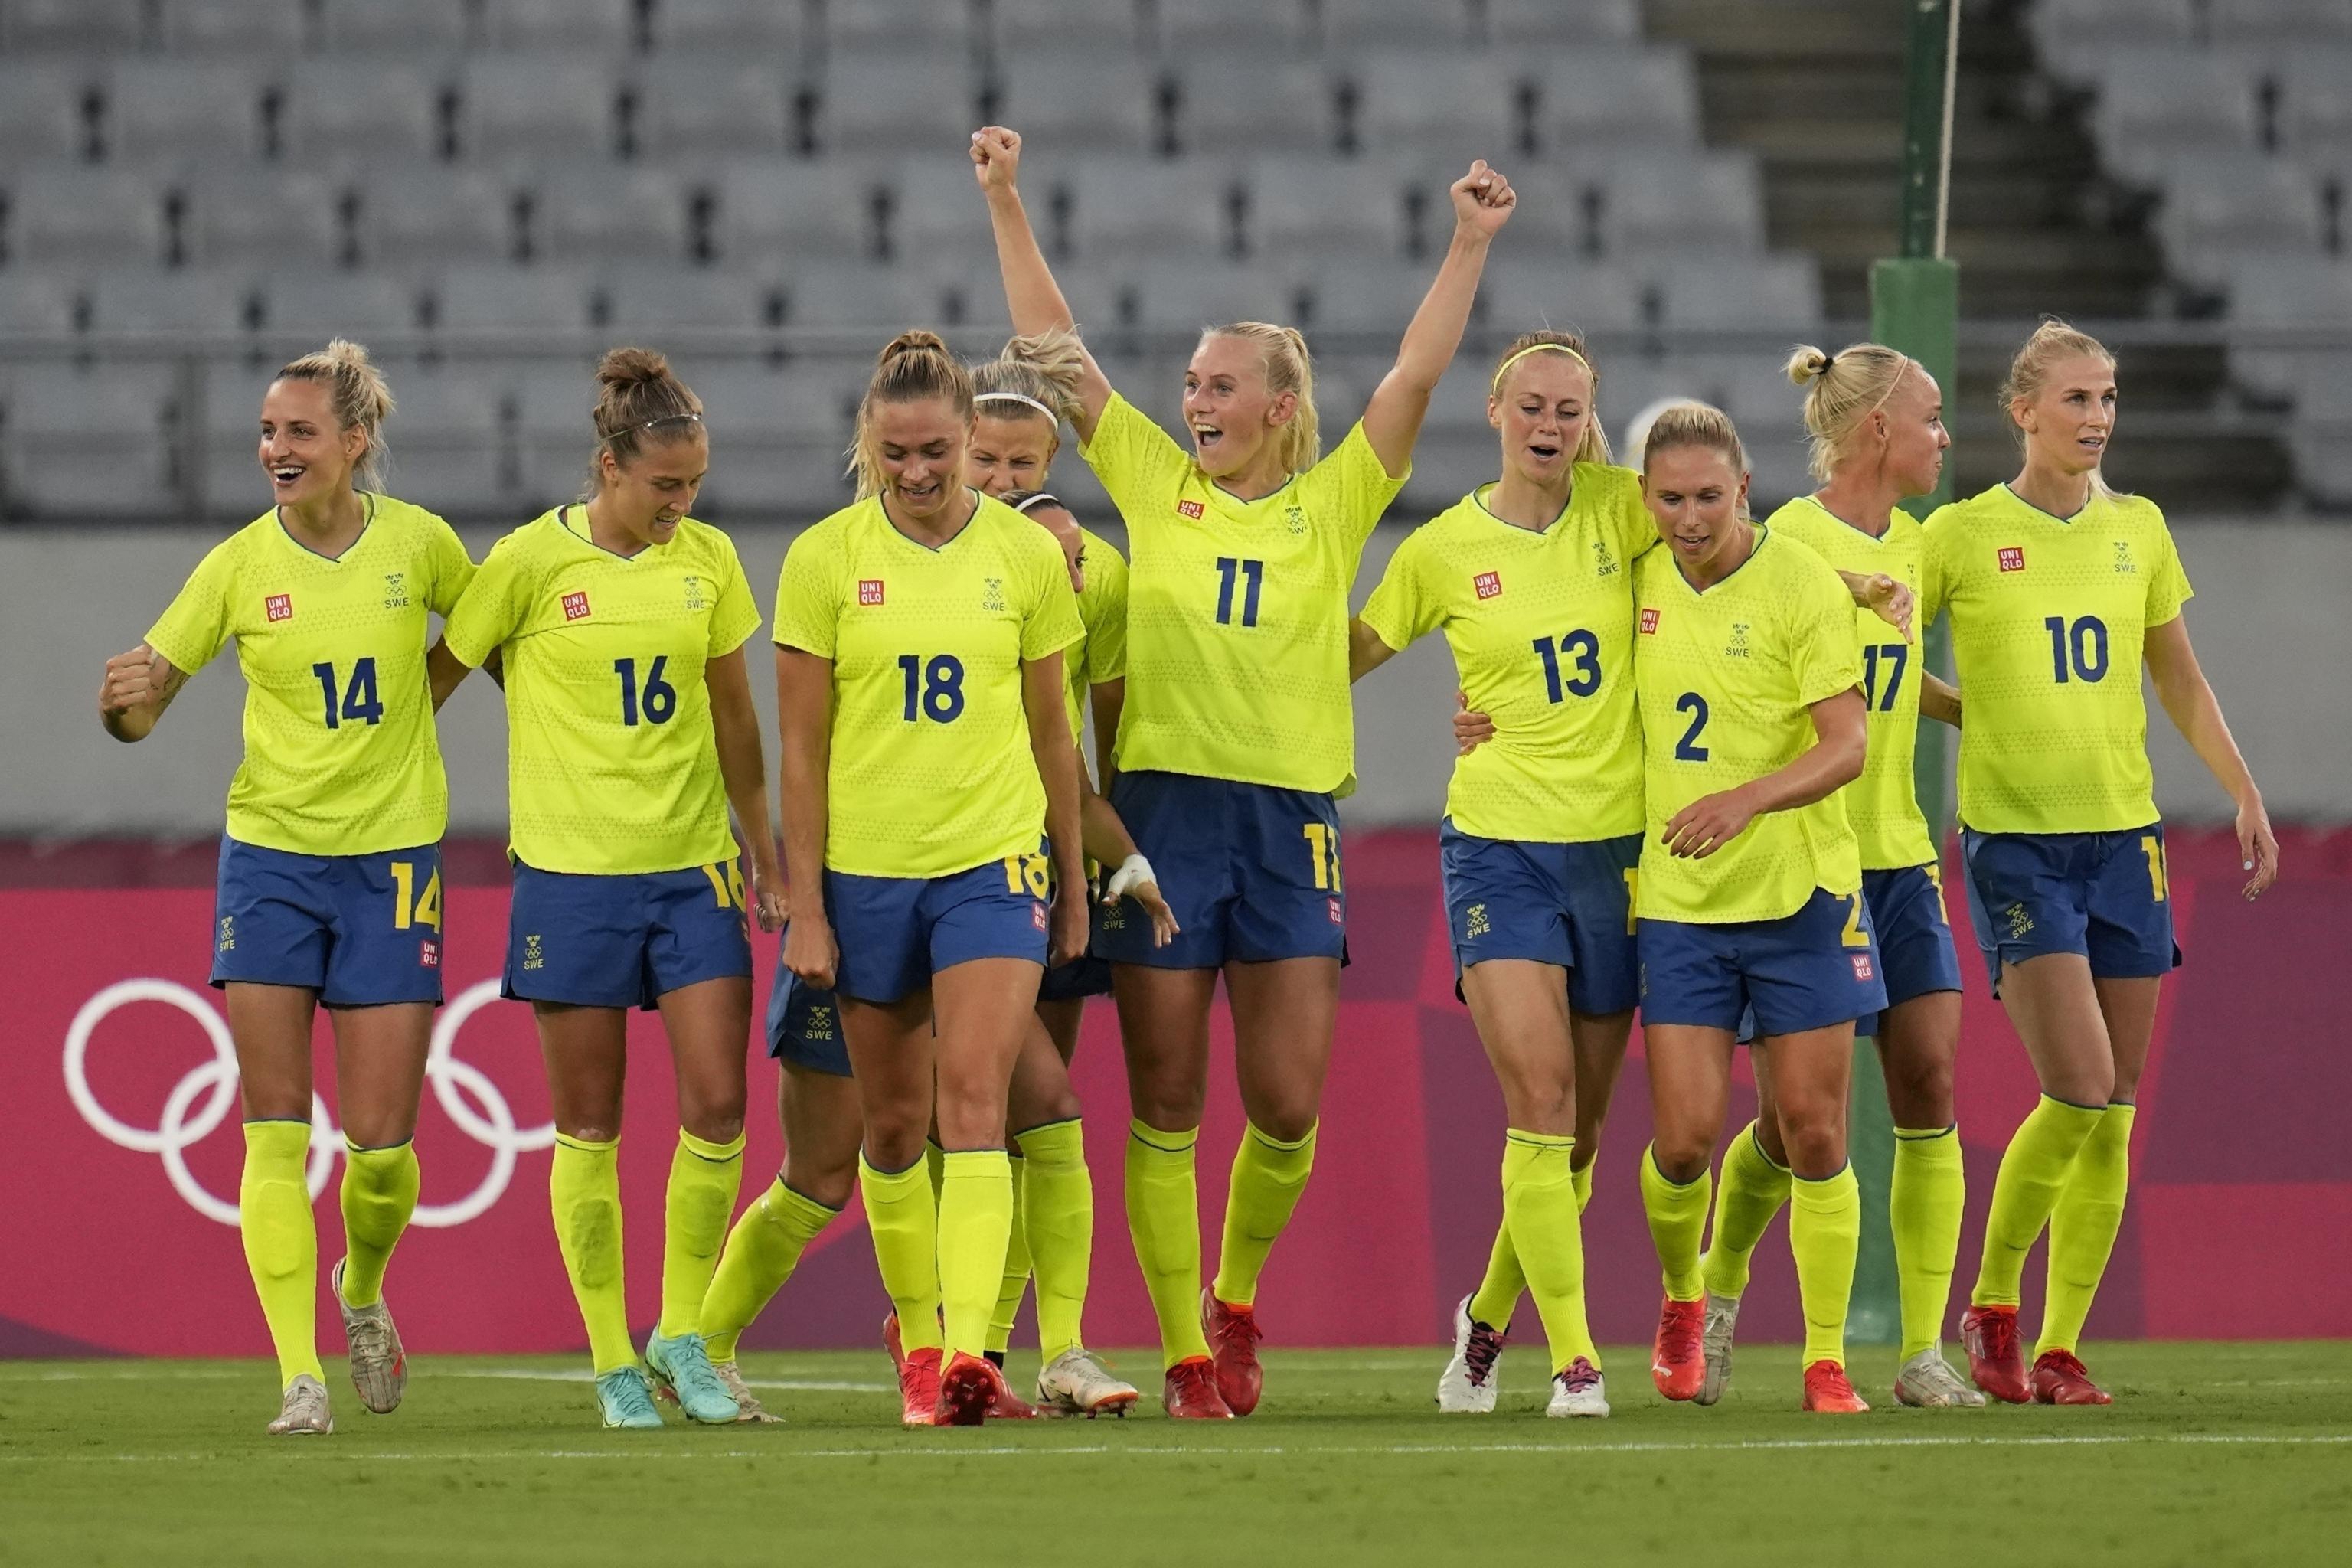 Olympic Soccer 21 Uswnt S Stunning Loss To Sweden Headlines Day 1 Results Bleacher Report Latest News Videos And Highlights